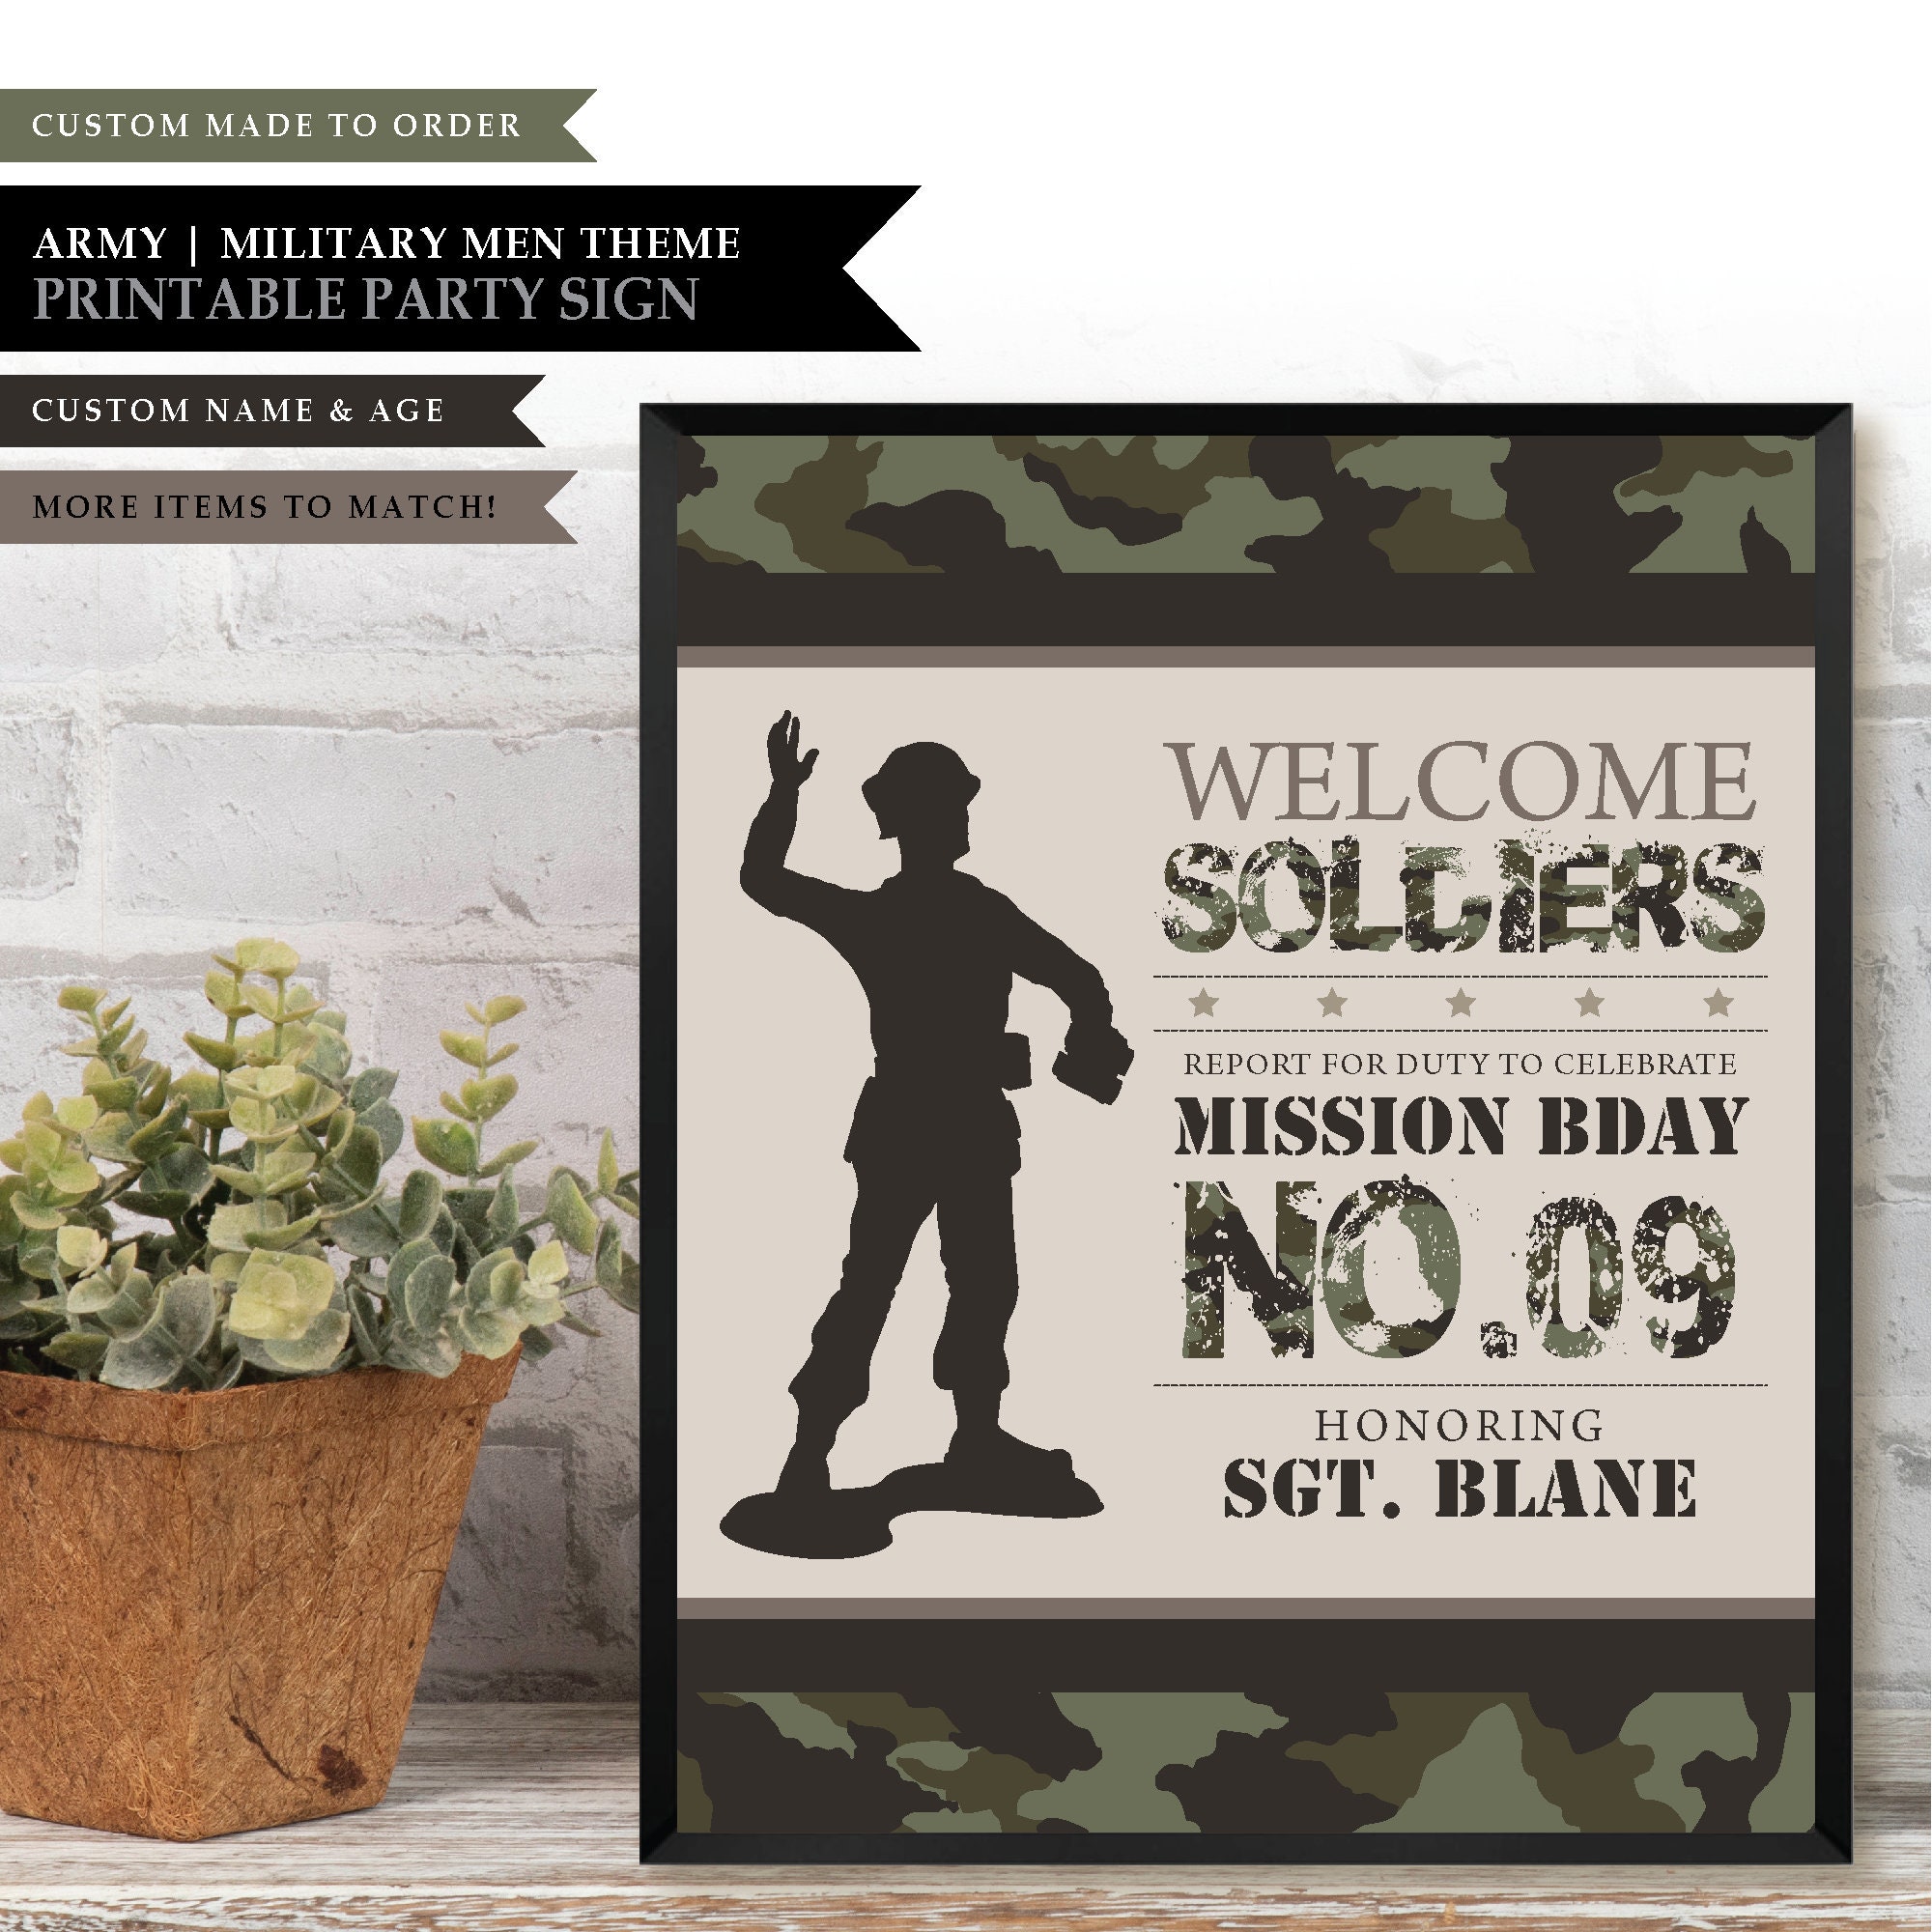 Alice in Wonderland Decoration, Printable PNG for Cricut, PDF, Garland  Banners, Mad Hatter Tea Party, Blue Hooded Card Soldier, Welcome Sign 